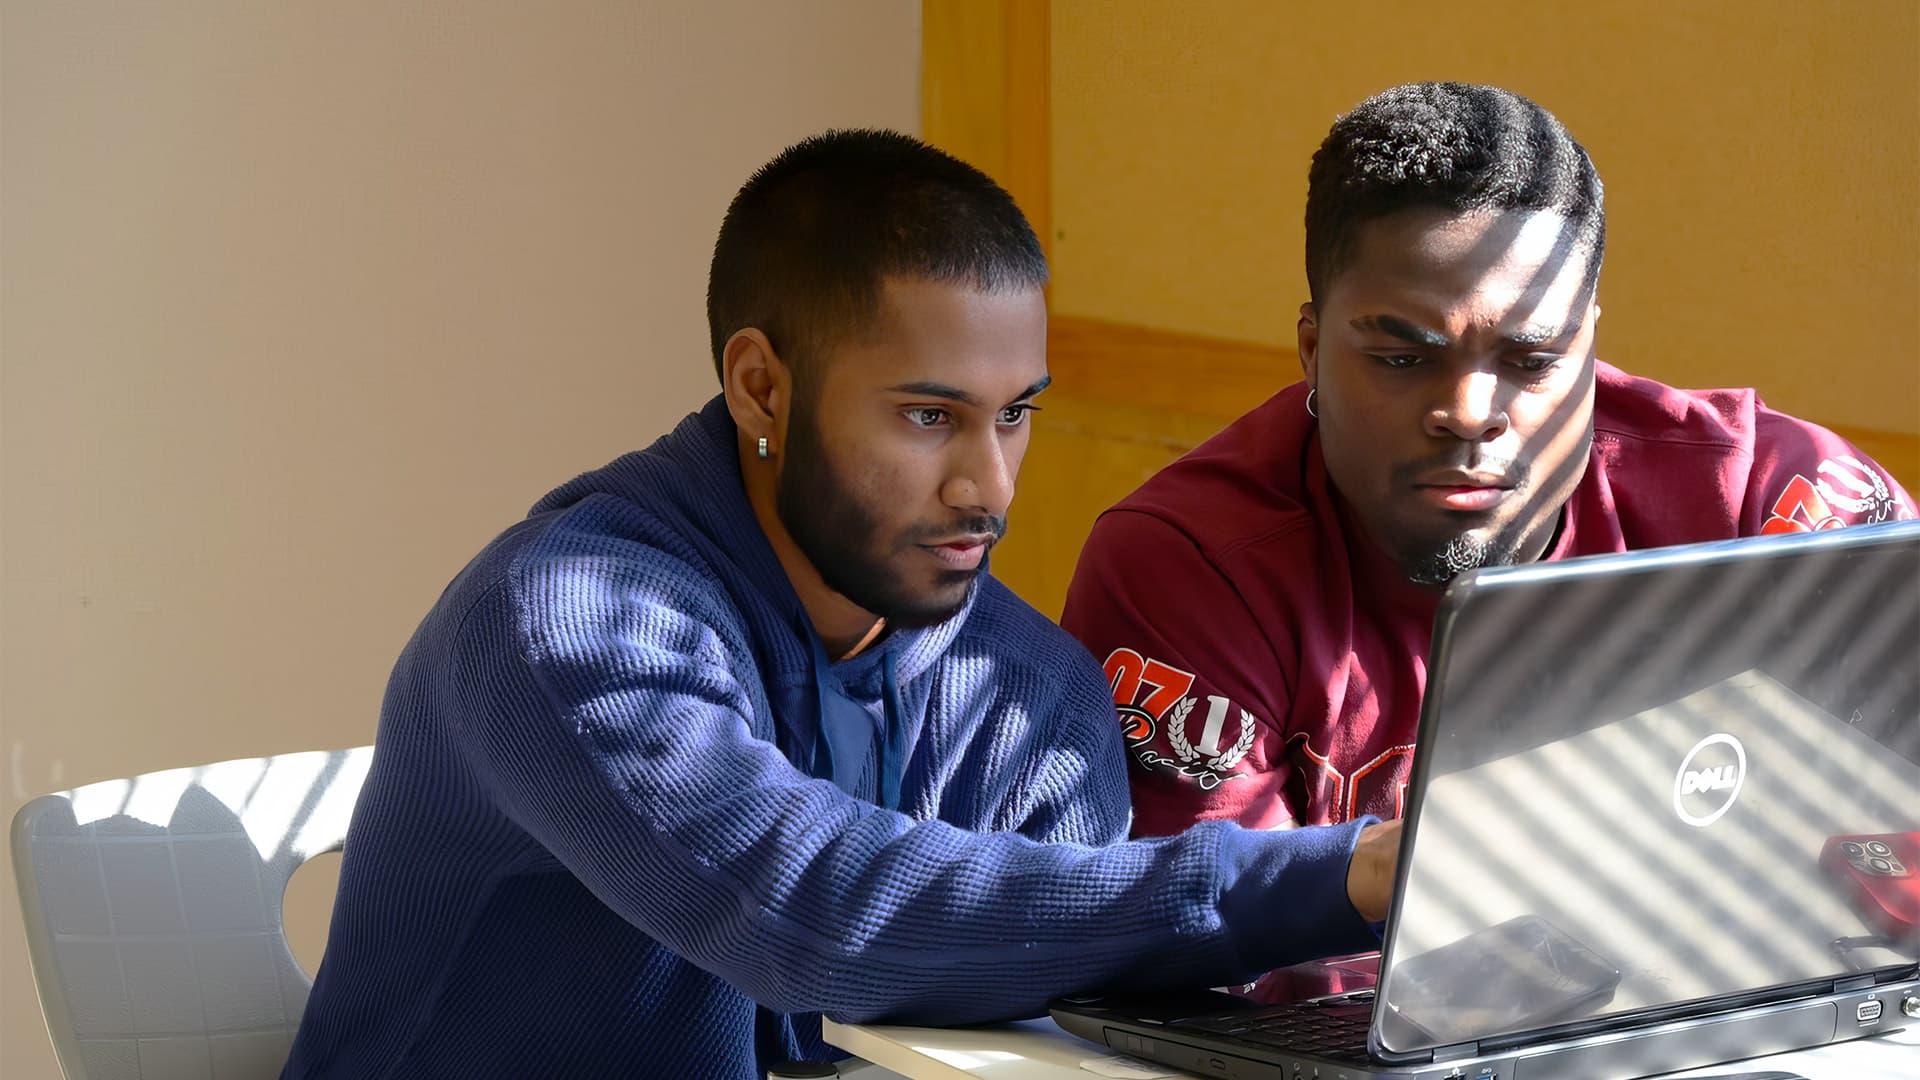 Two male UMFK students sit at a desk together working collaboratively on a laptop